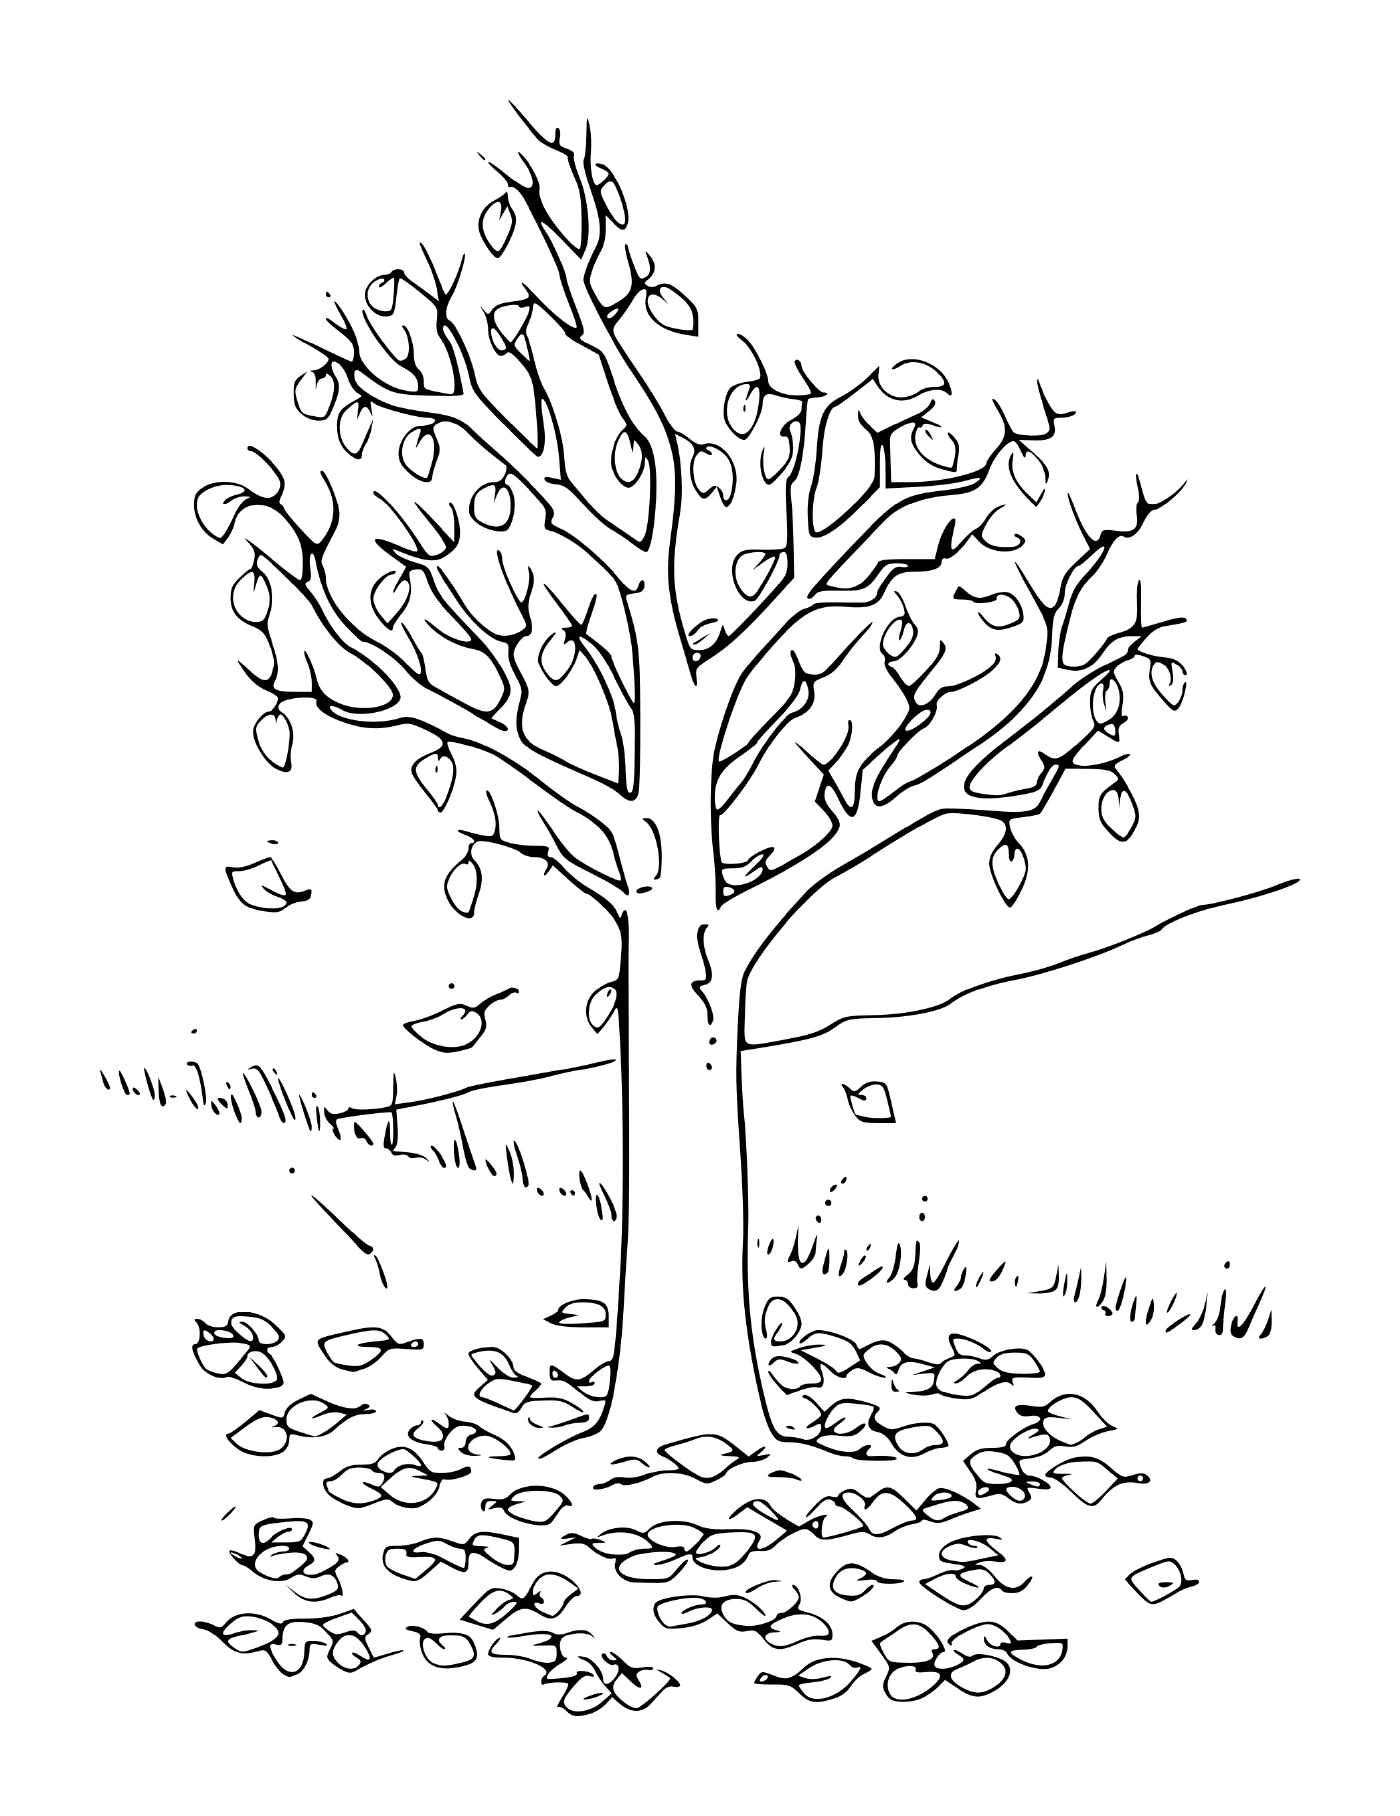  A tree with leaves 